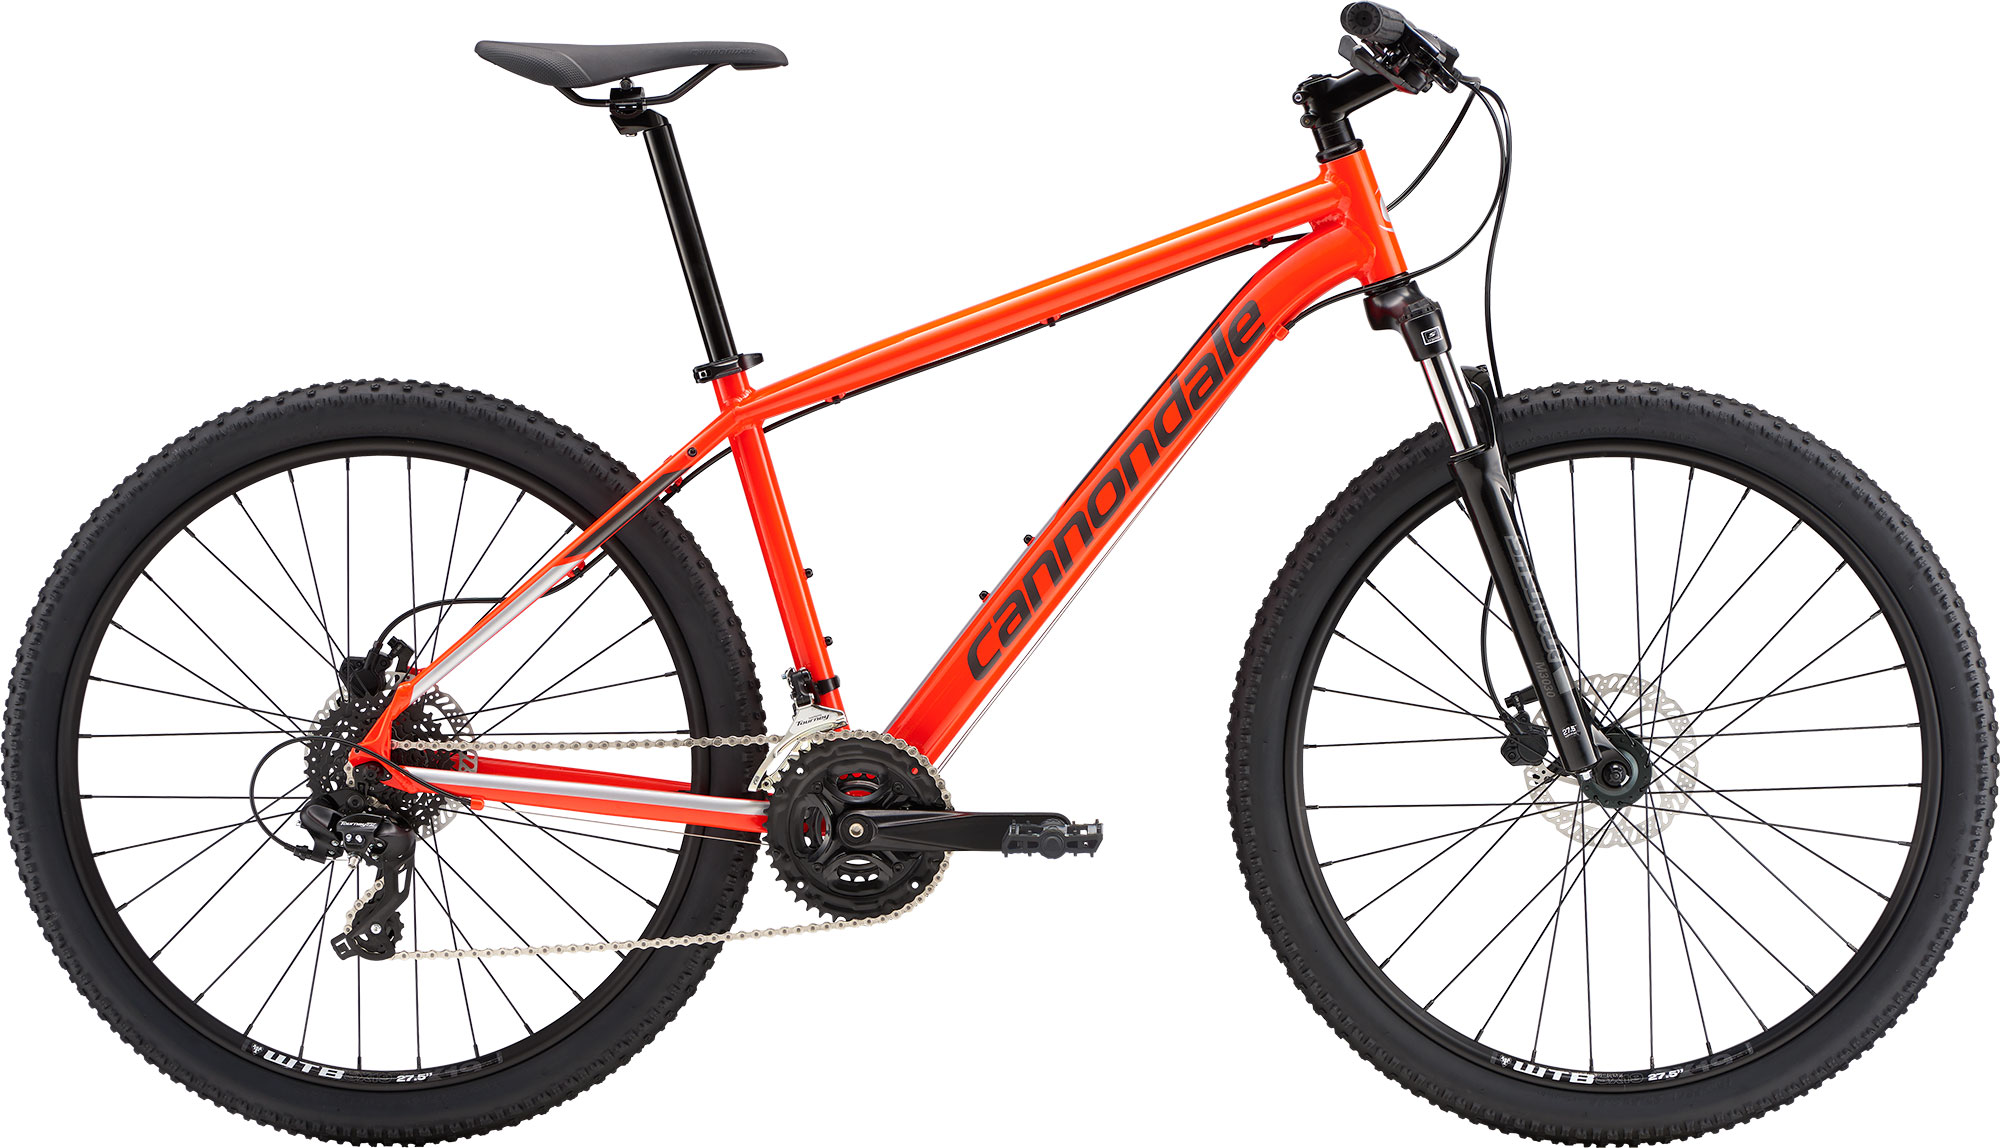 Велосипед 27,5" Cannondale CATALYST 2 рама - L 2019 ARD фото 1